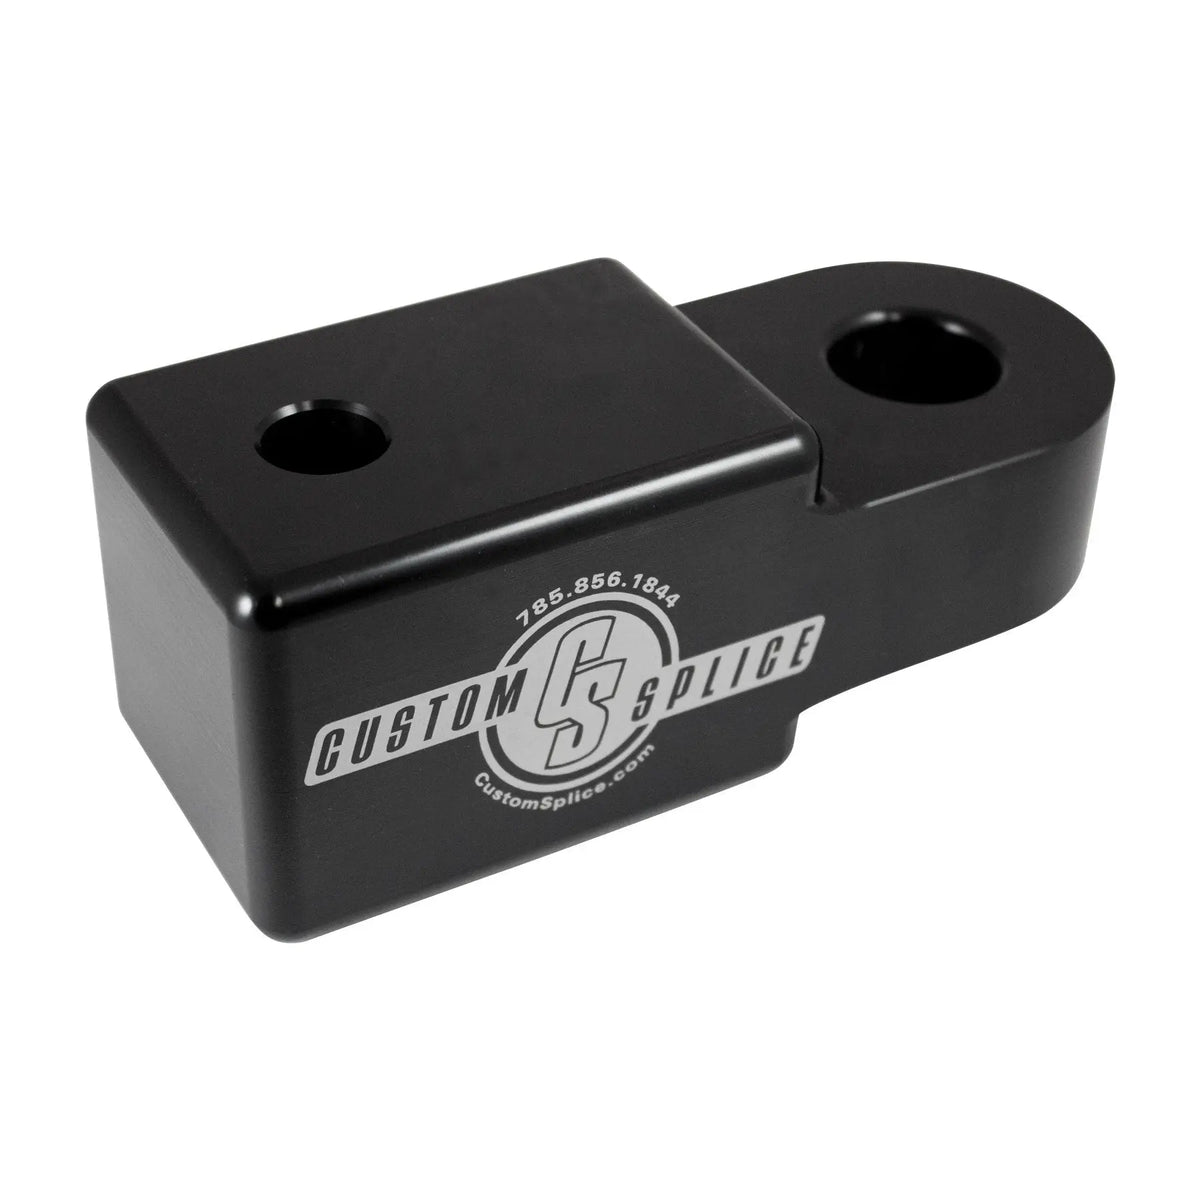 Black 2 1/2" Hitch Receiver Shackle Adapter - Angled for Profile and Scale. 